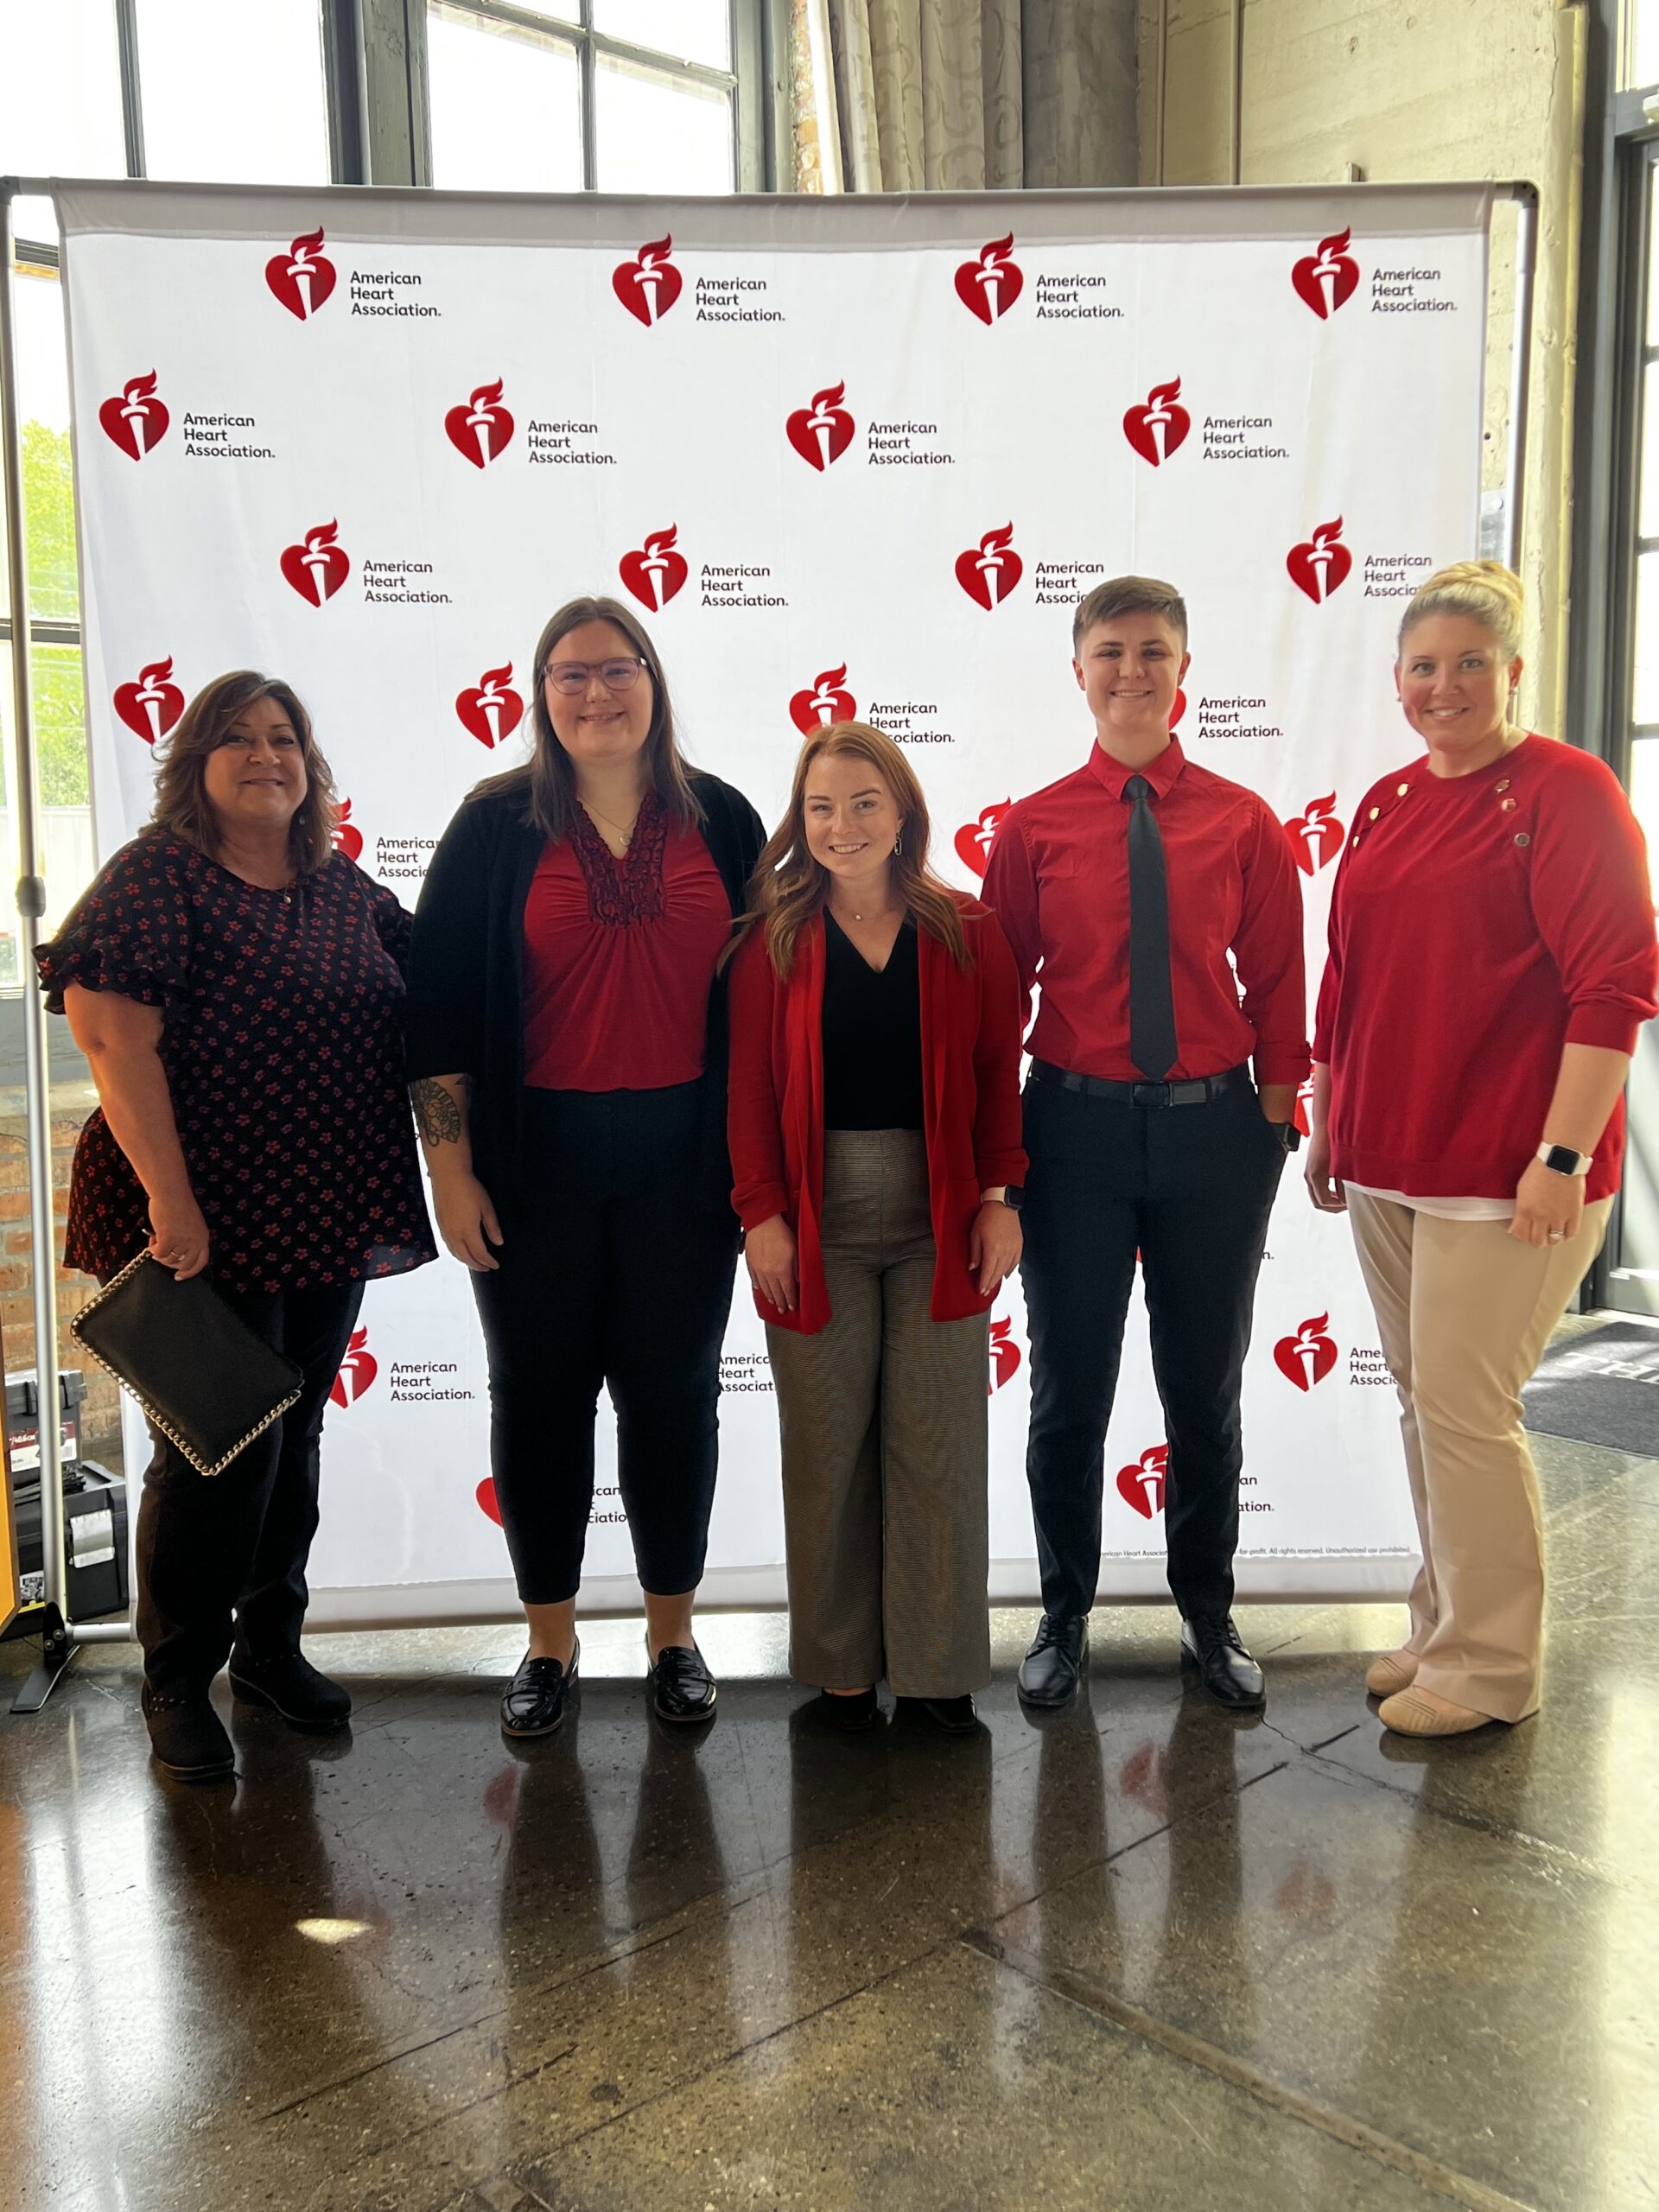 Messer Construction Company employees standing in front of American heart association event signage